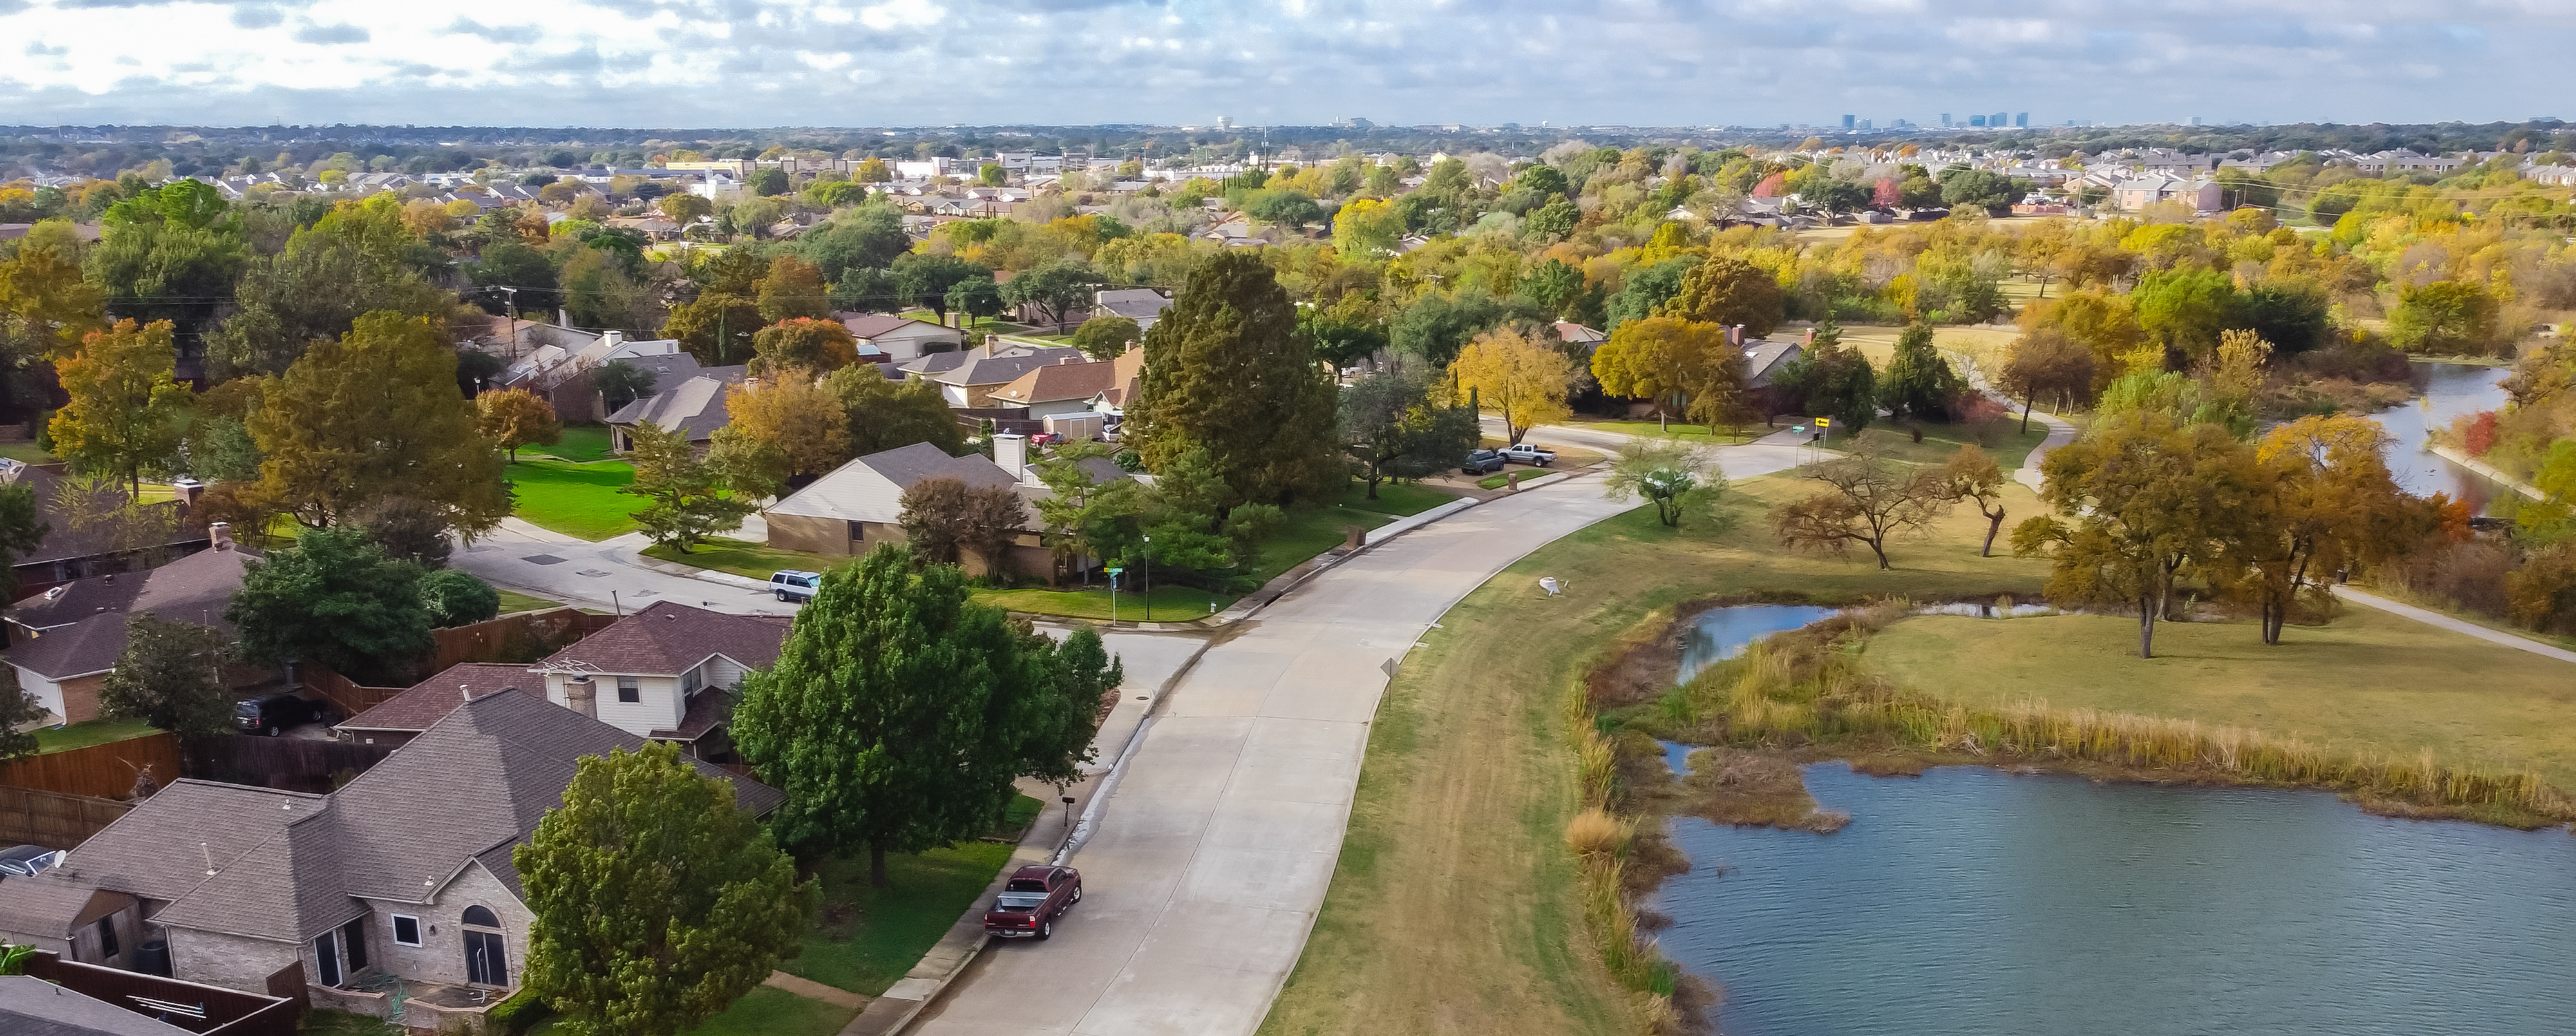 Aerial view lakeside and Parkside residential neighborhood downtown Dallas in distance background. Typical single family houses with matured trees bright fall foliages in Carrollton, Texas